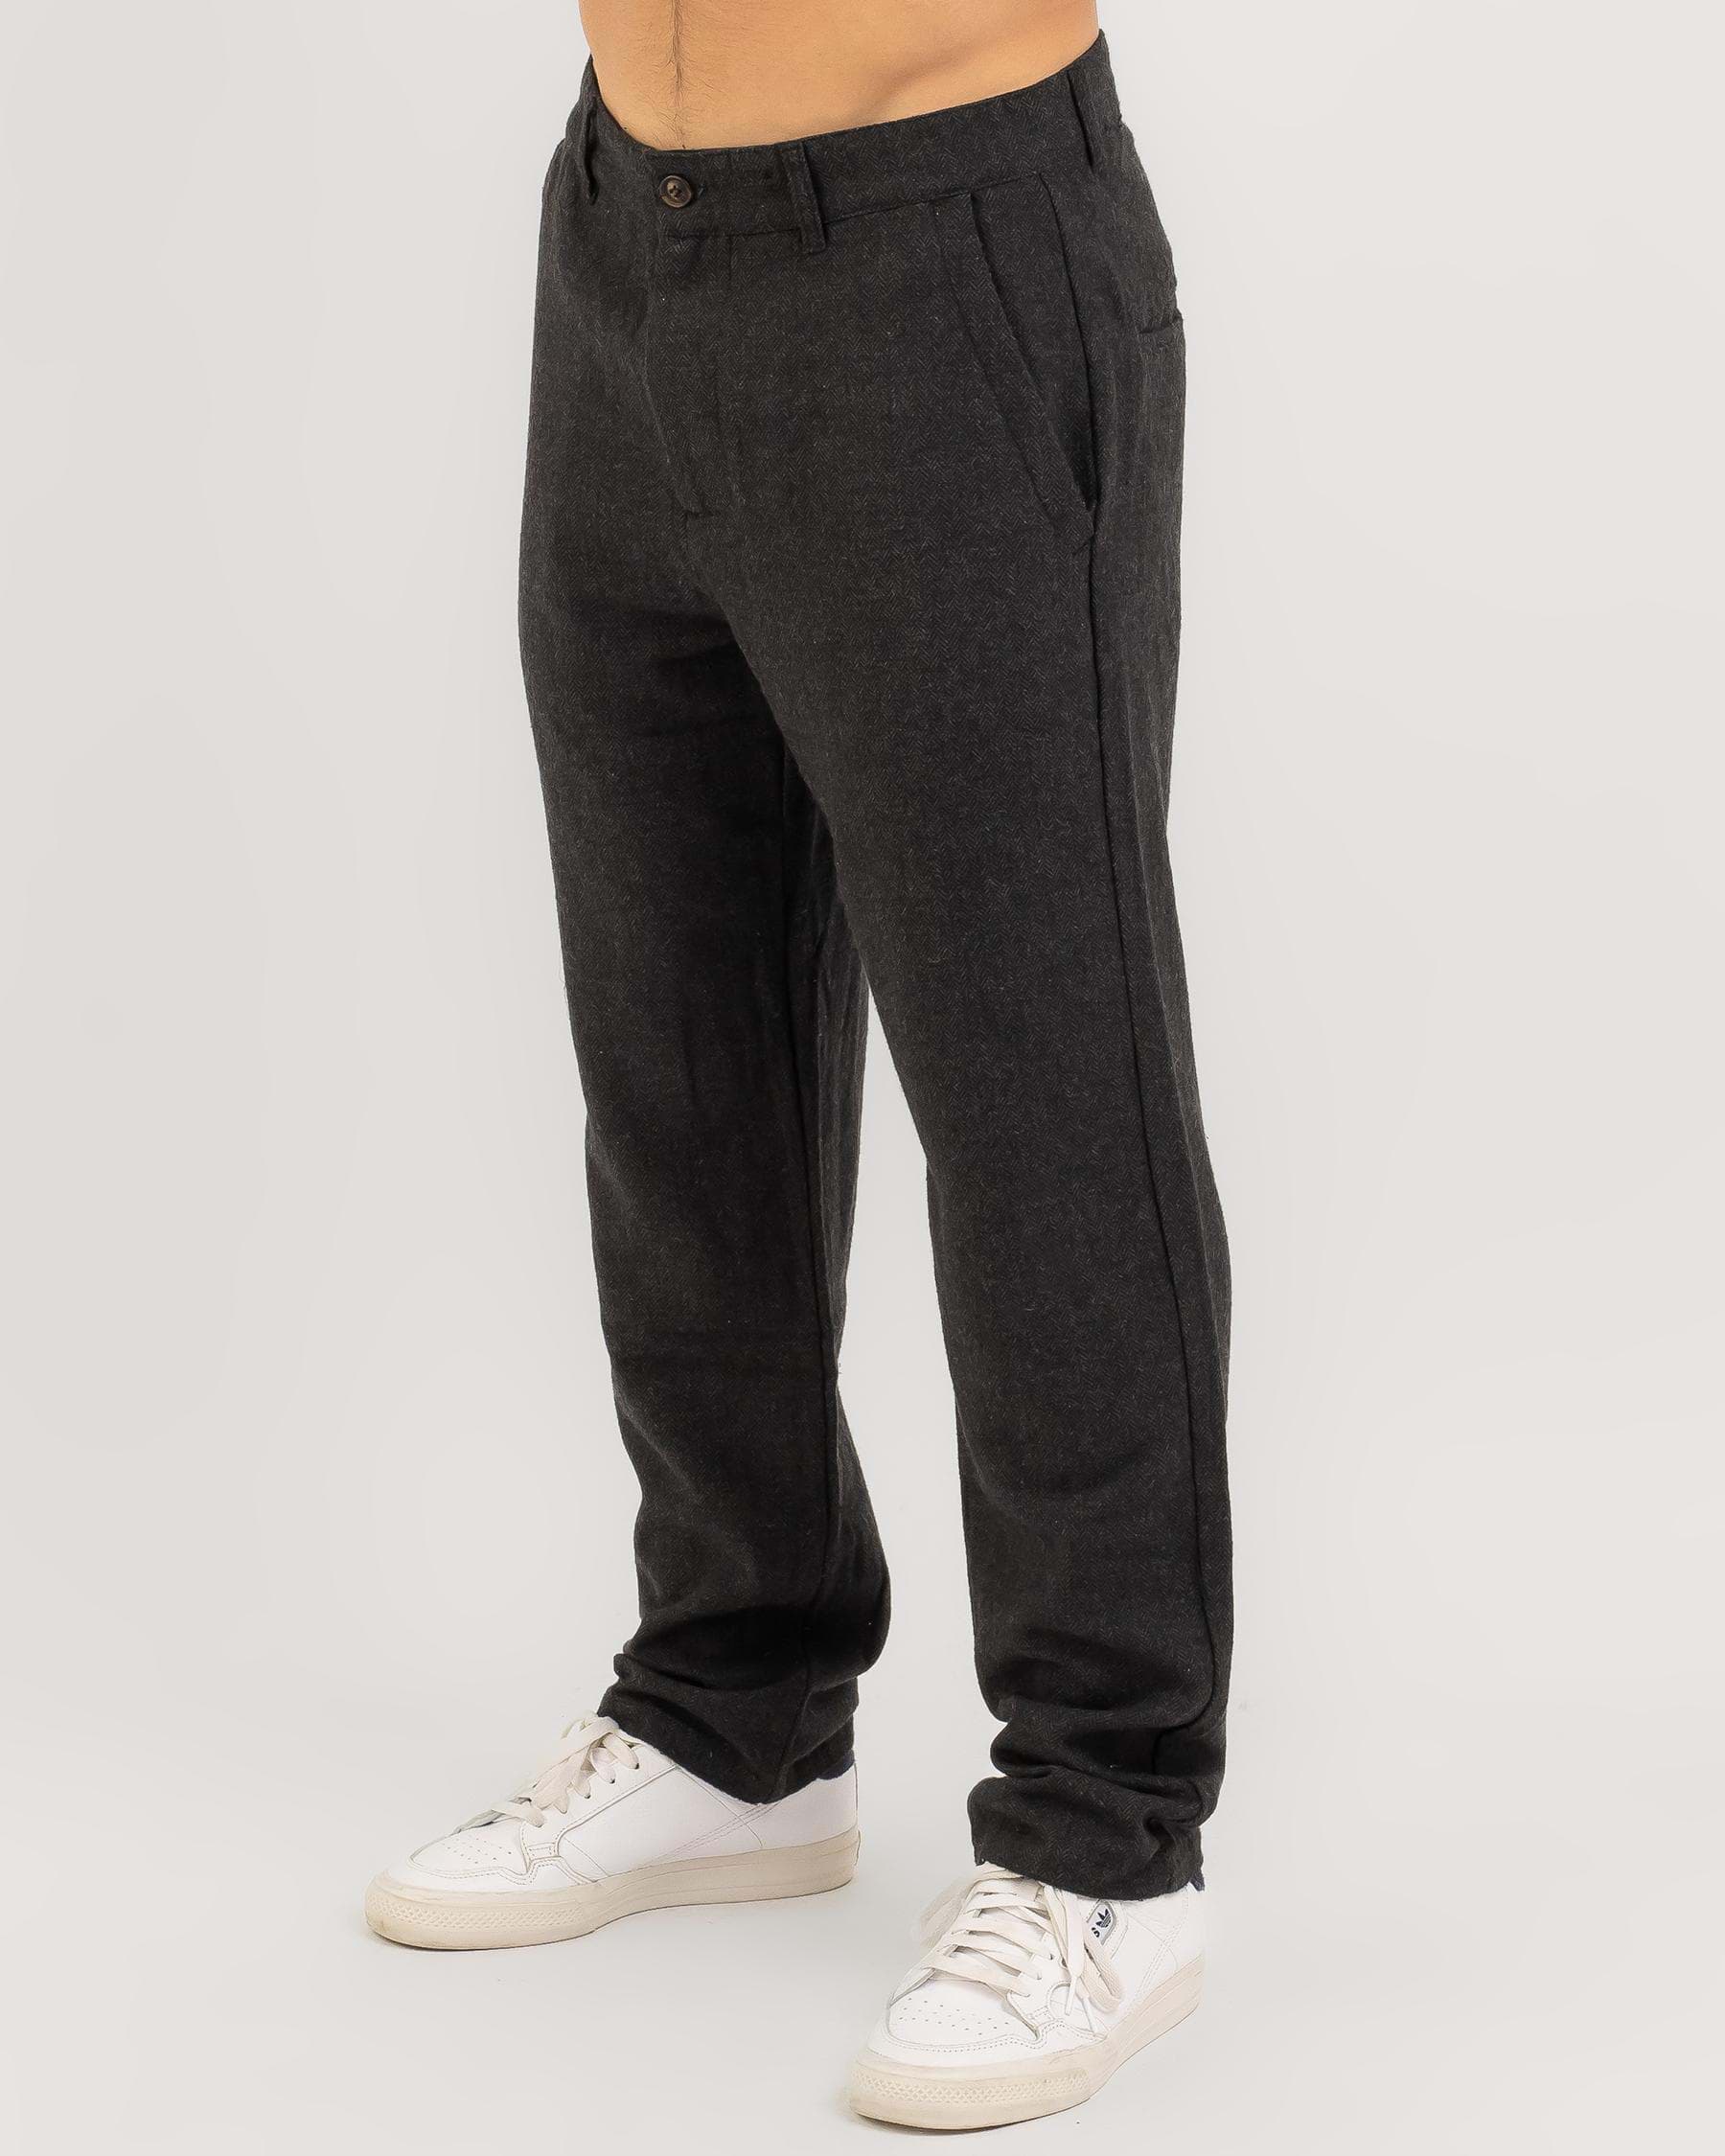 Rhythm Essential Trouser Pants In Charcoal - Fast Shipping & Easy ...